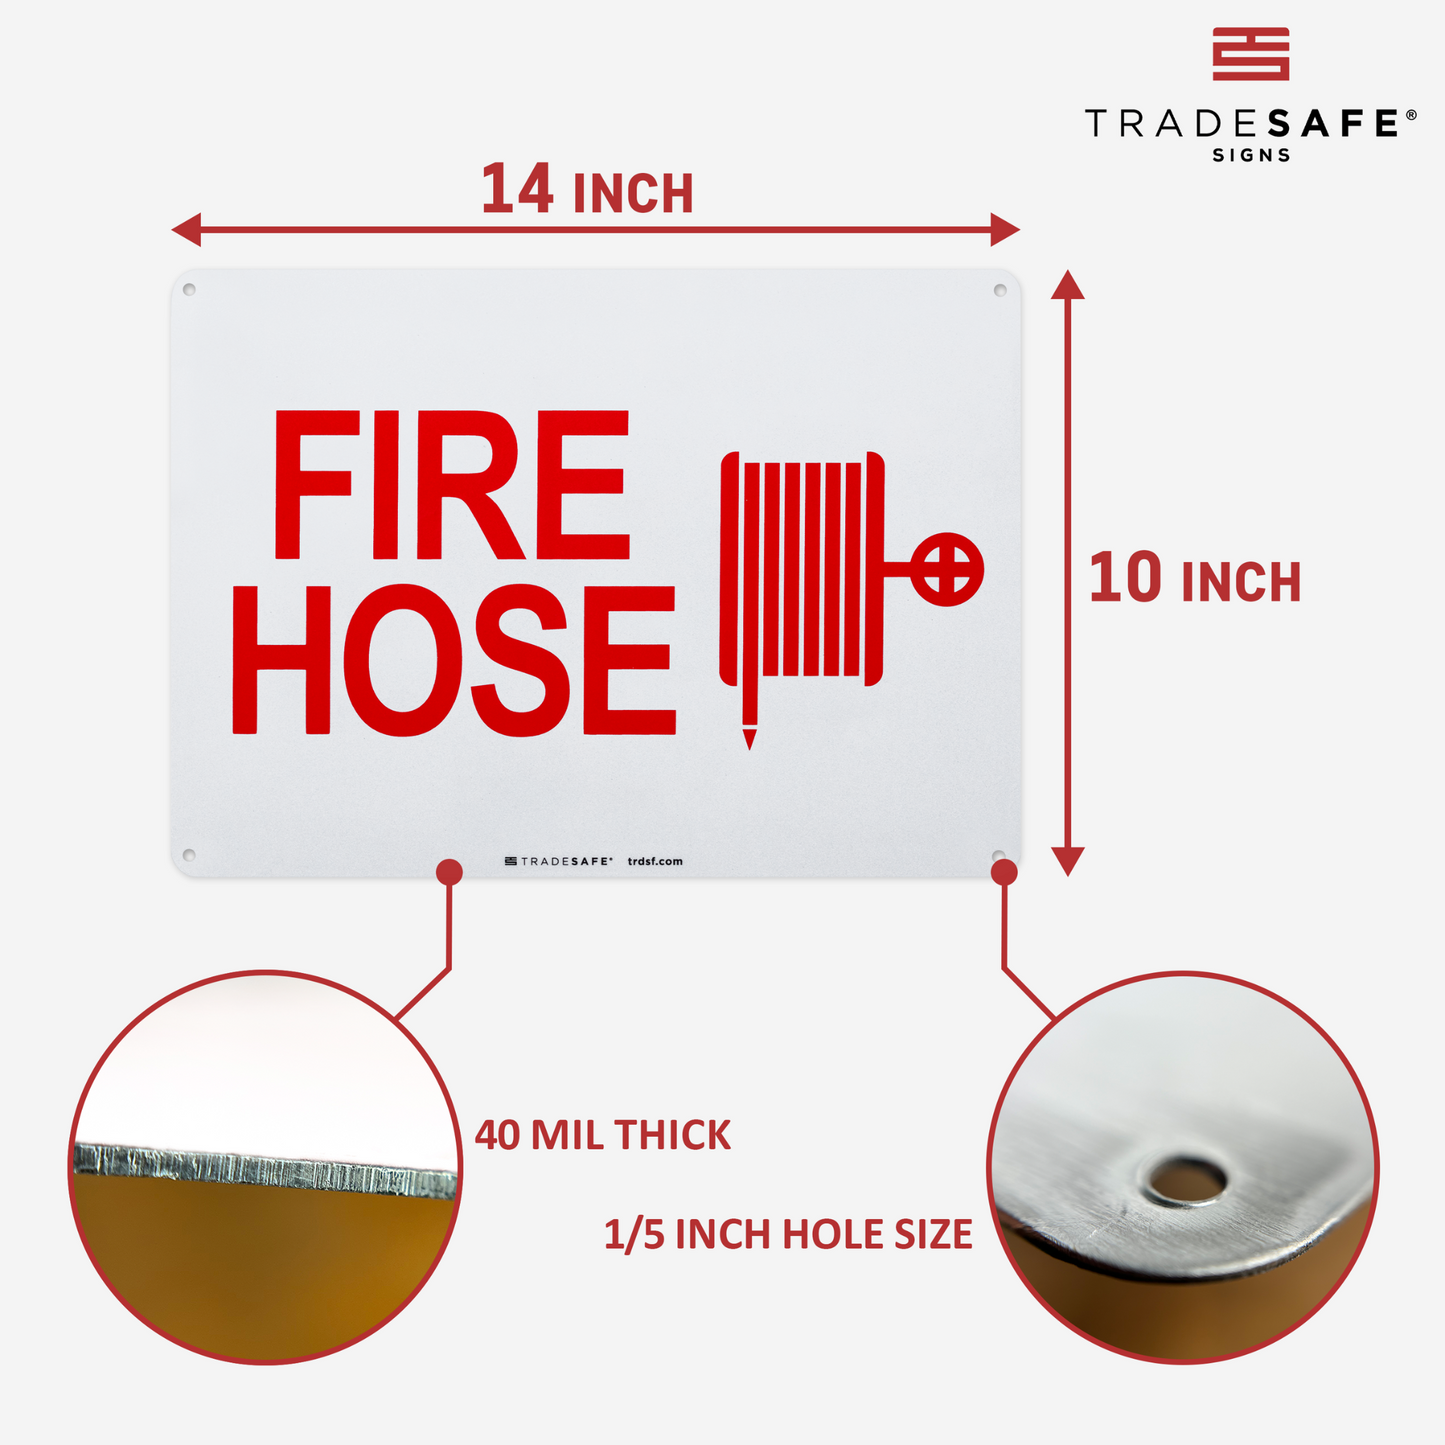 dimensions of fire hose sign